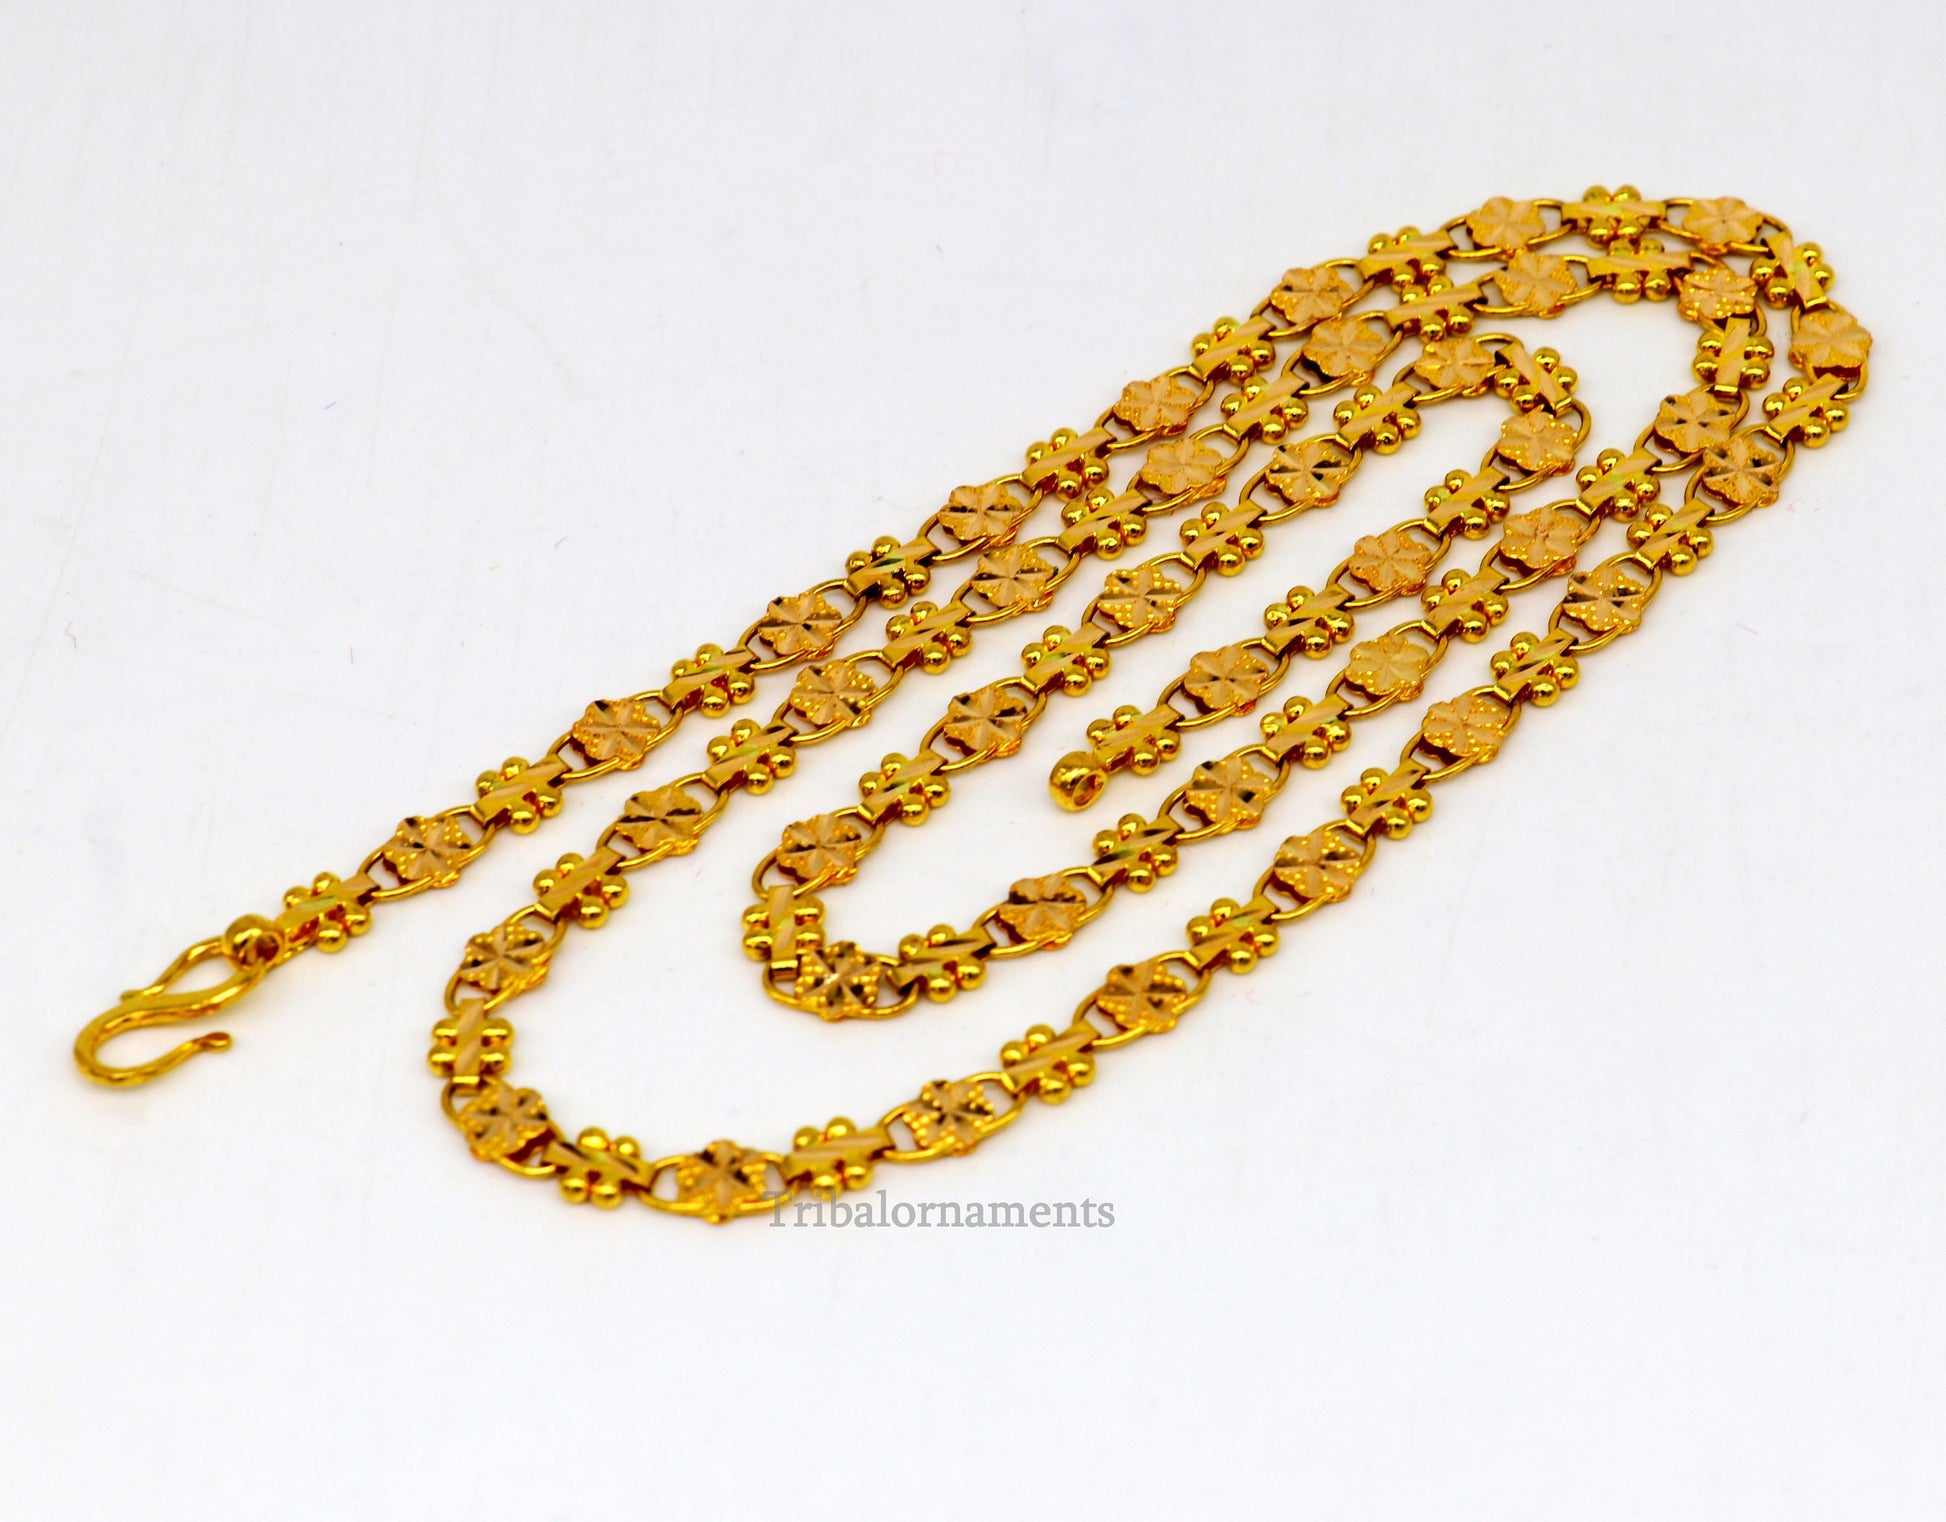 Vintage floral design Handmade Genuine 22 karat yellow gold gorgeous chain stylish chain gifting royal jewelry from india ch261 - TRIBAL ORNAMENTS